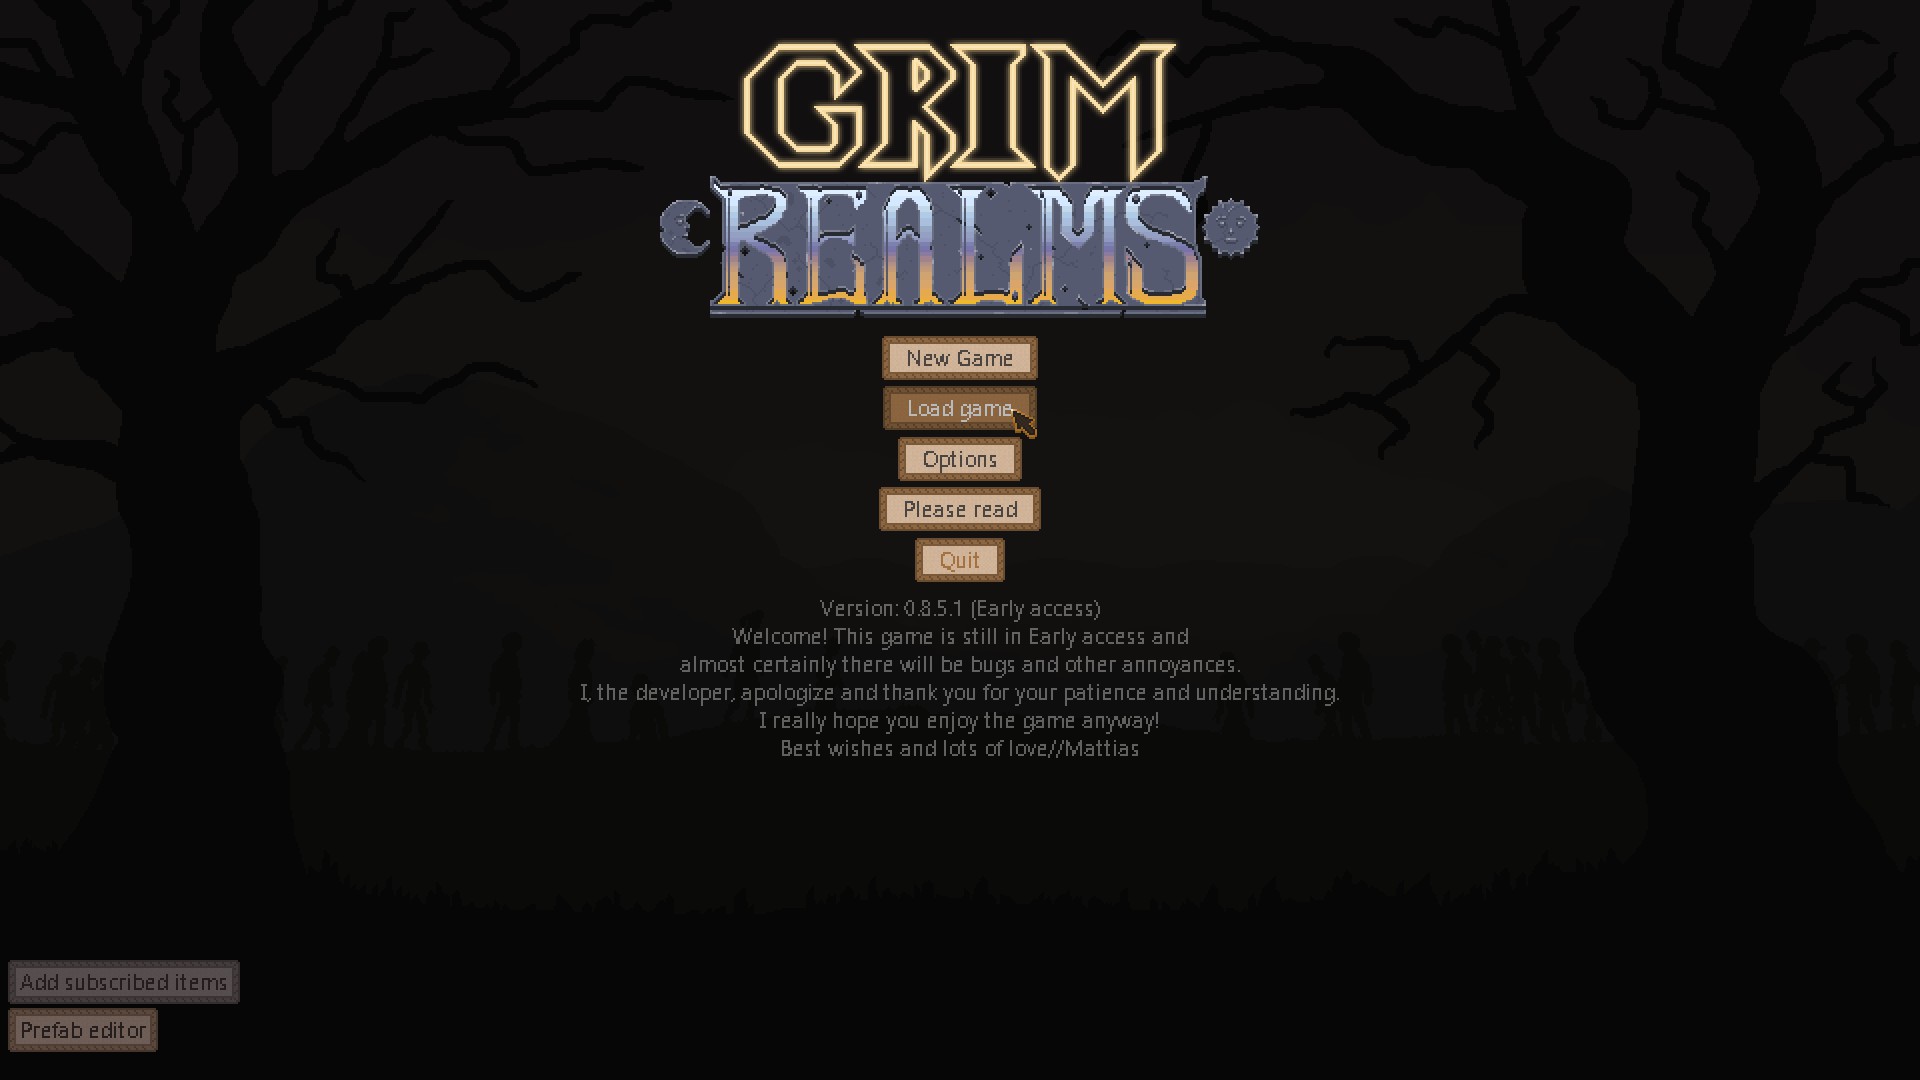 Grim Realms - Complete Guide to Save Files - A Complete Guide to Save Files - 69948C4